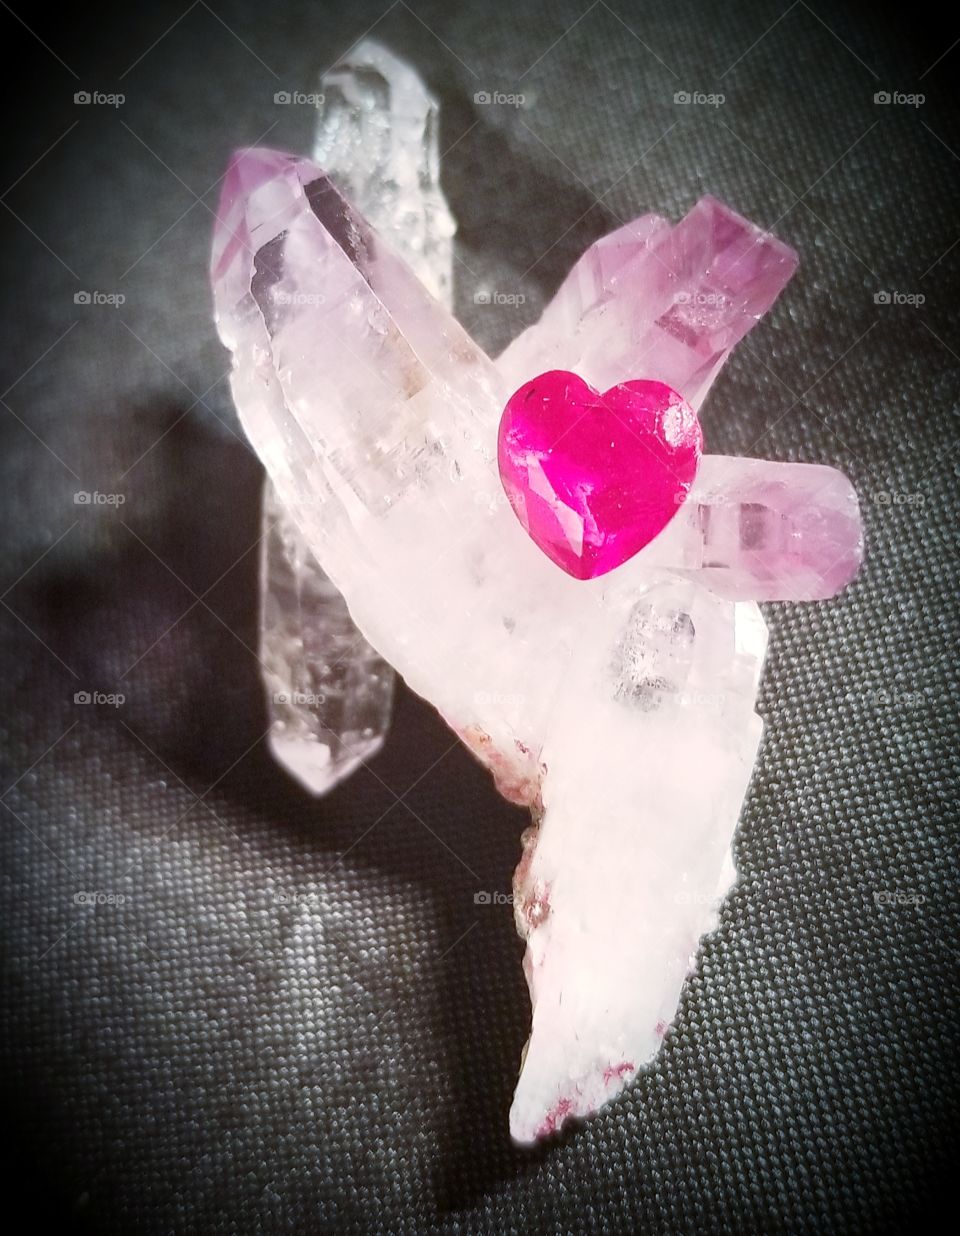 #ChrystArtisticCollection2019 #MexicanAmethyst #Ruby #Red #HeartCutGenuineRuby